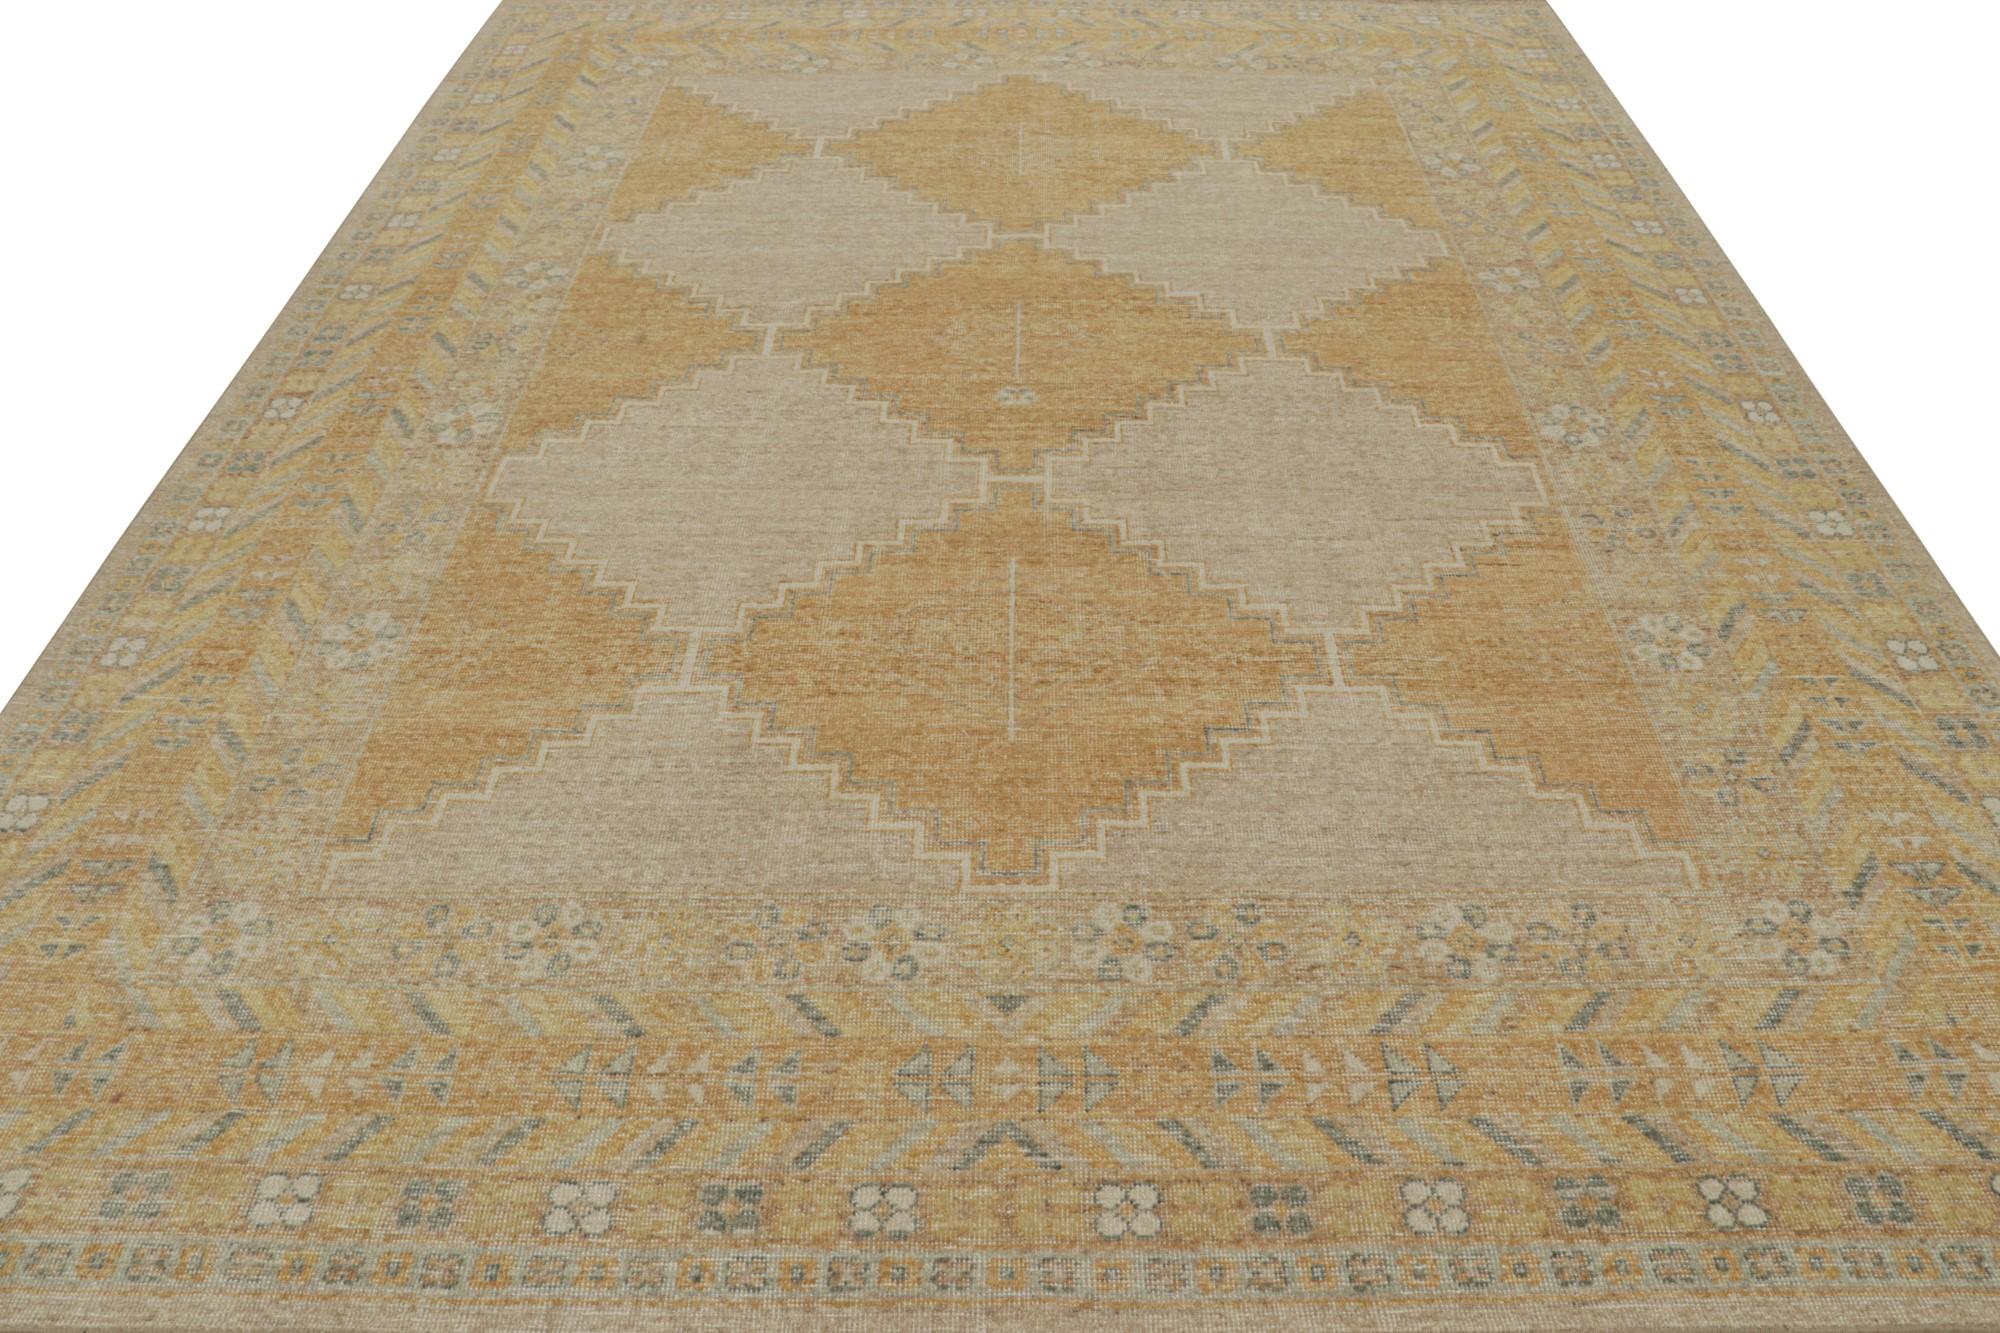 Indian Rug & Kilim’s Modern Rug in Beige and Gold Tones, with Geometric Patterns For Sale